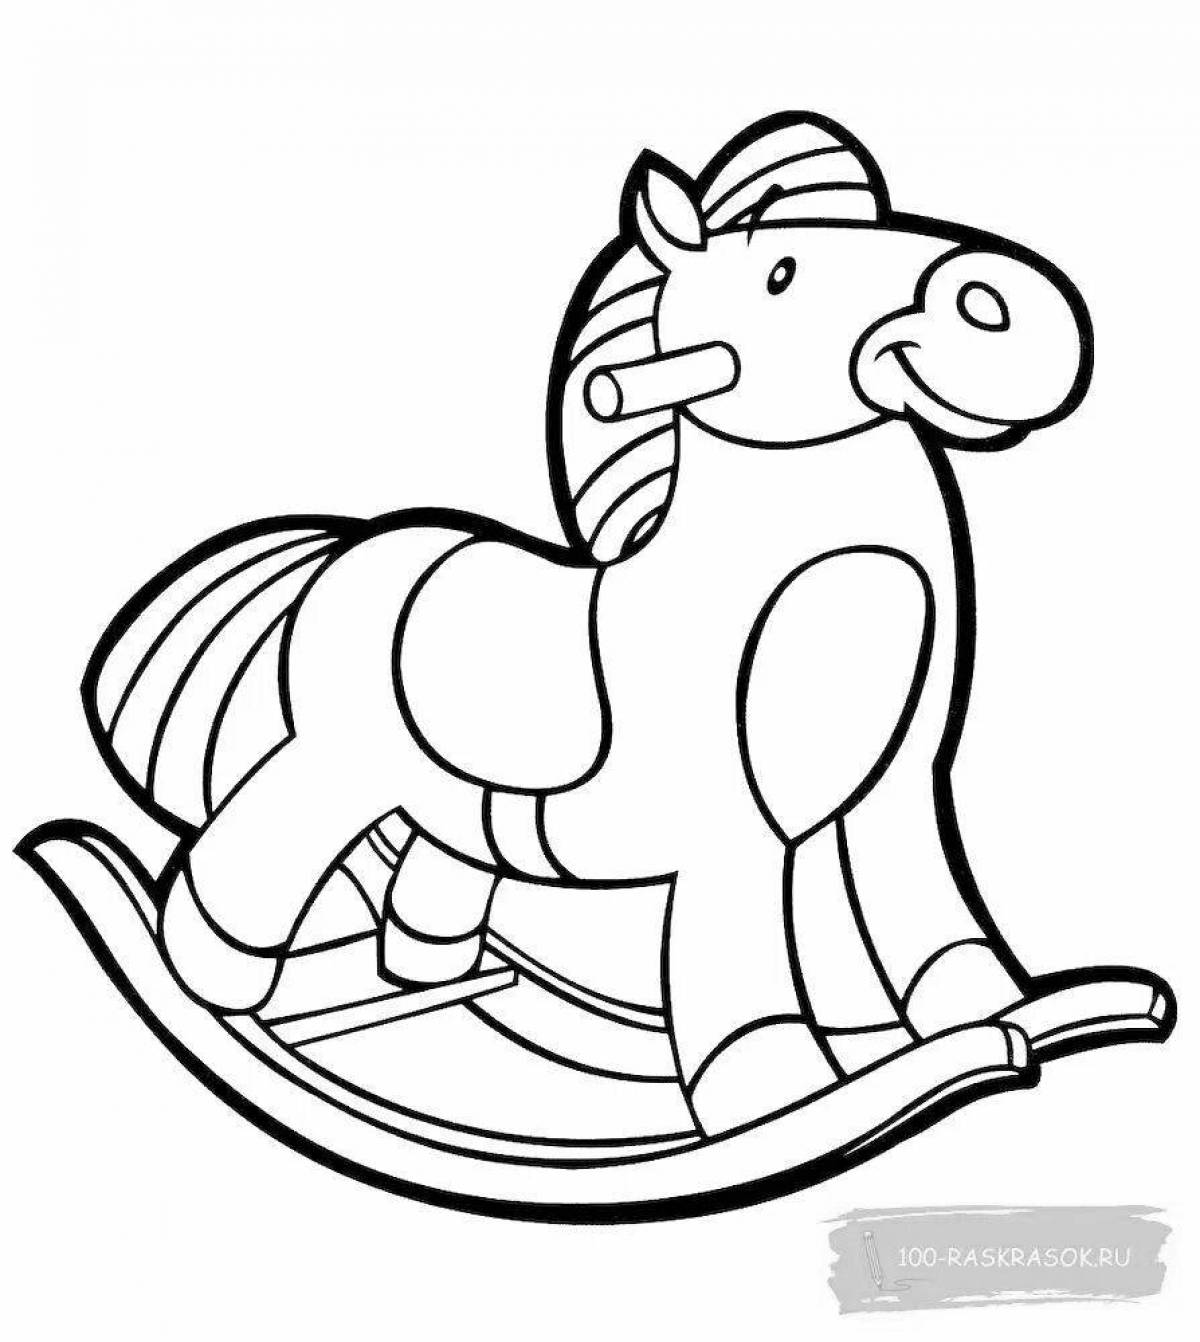 Charming horse coloring book